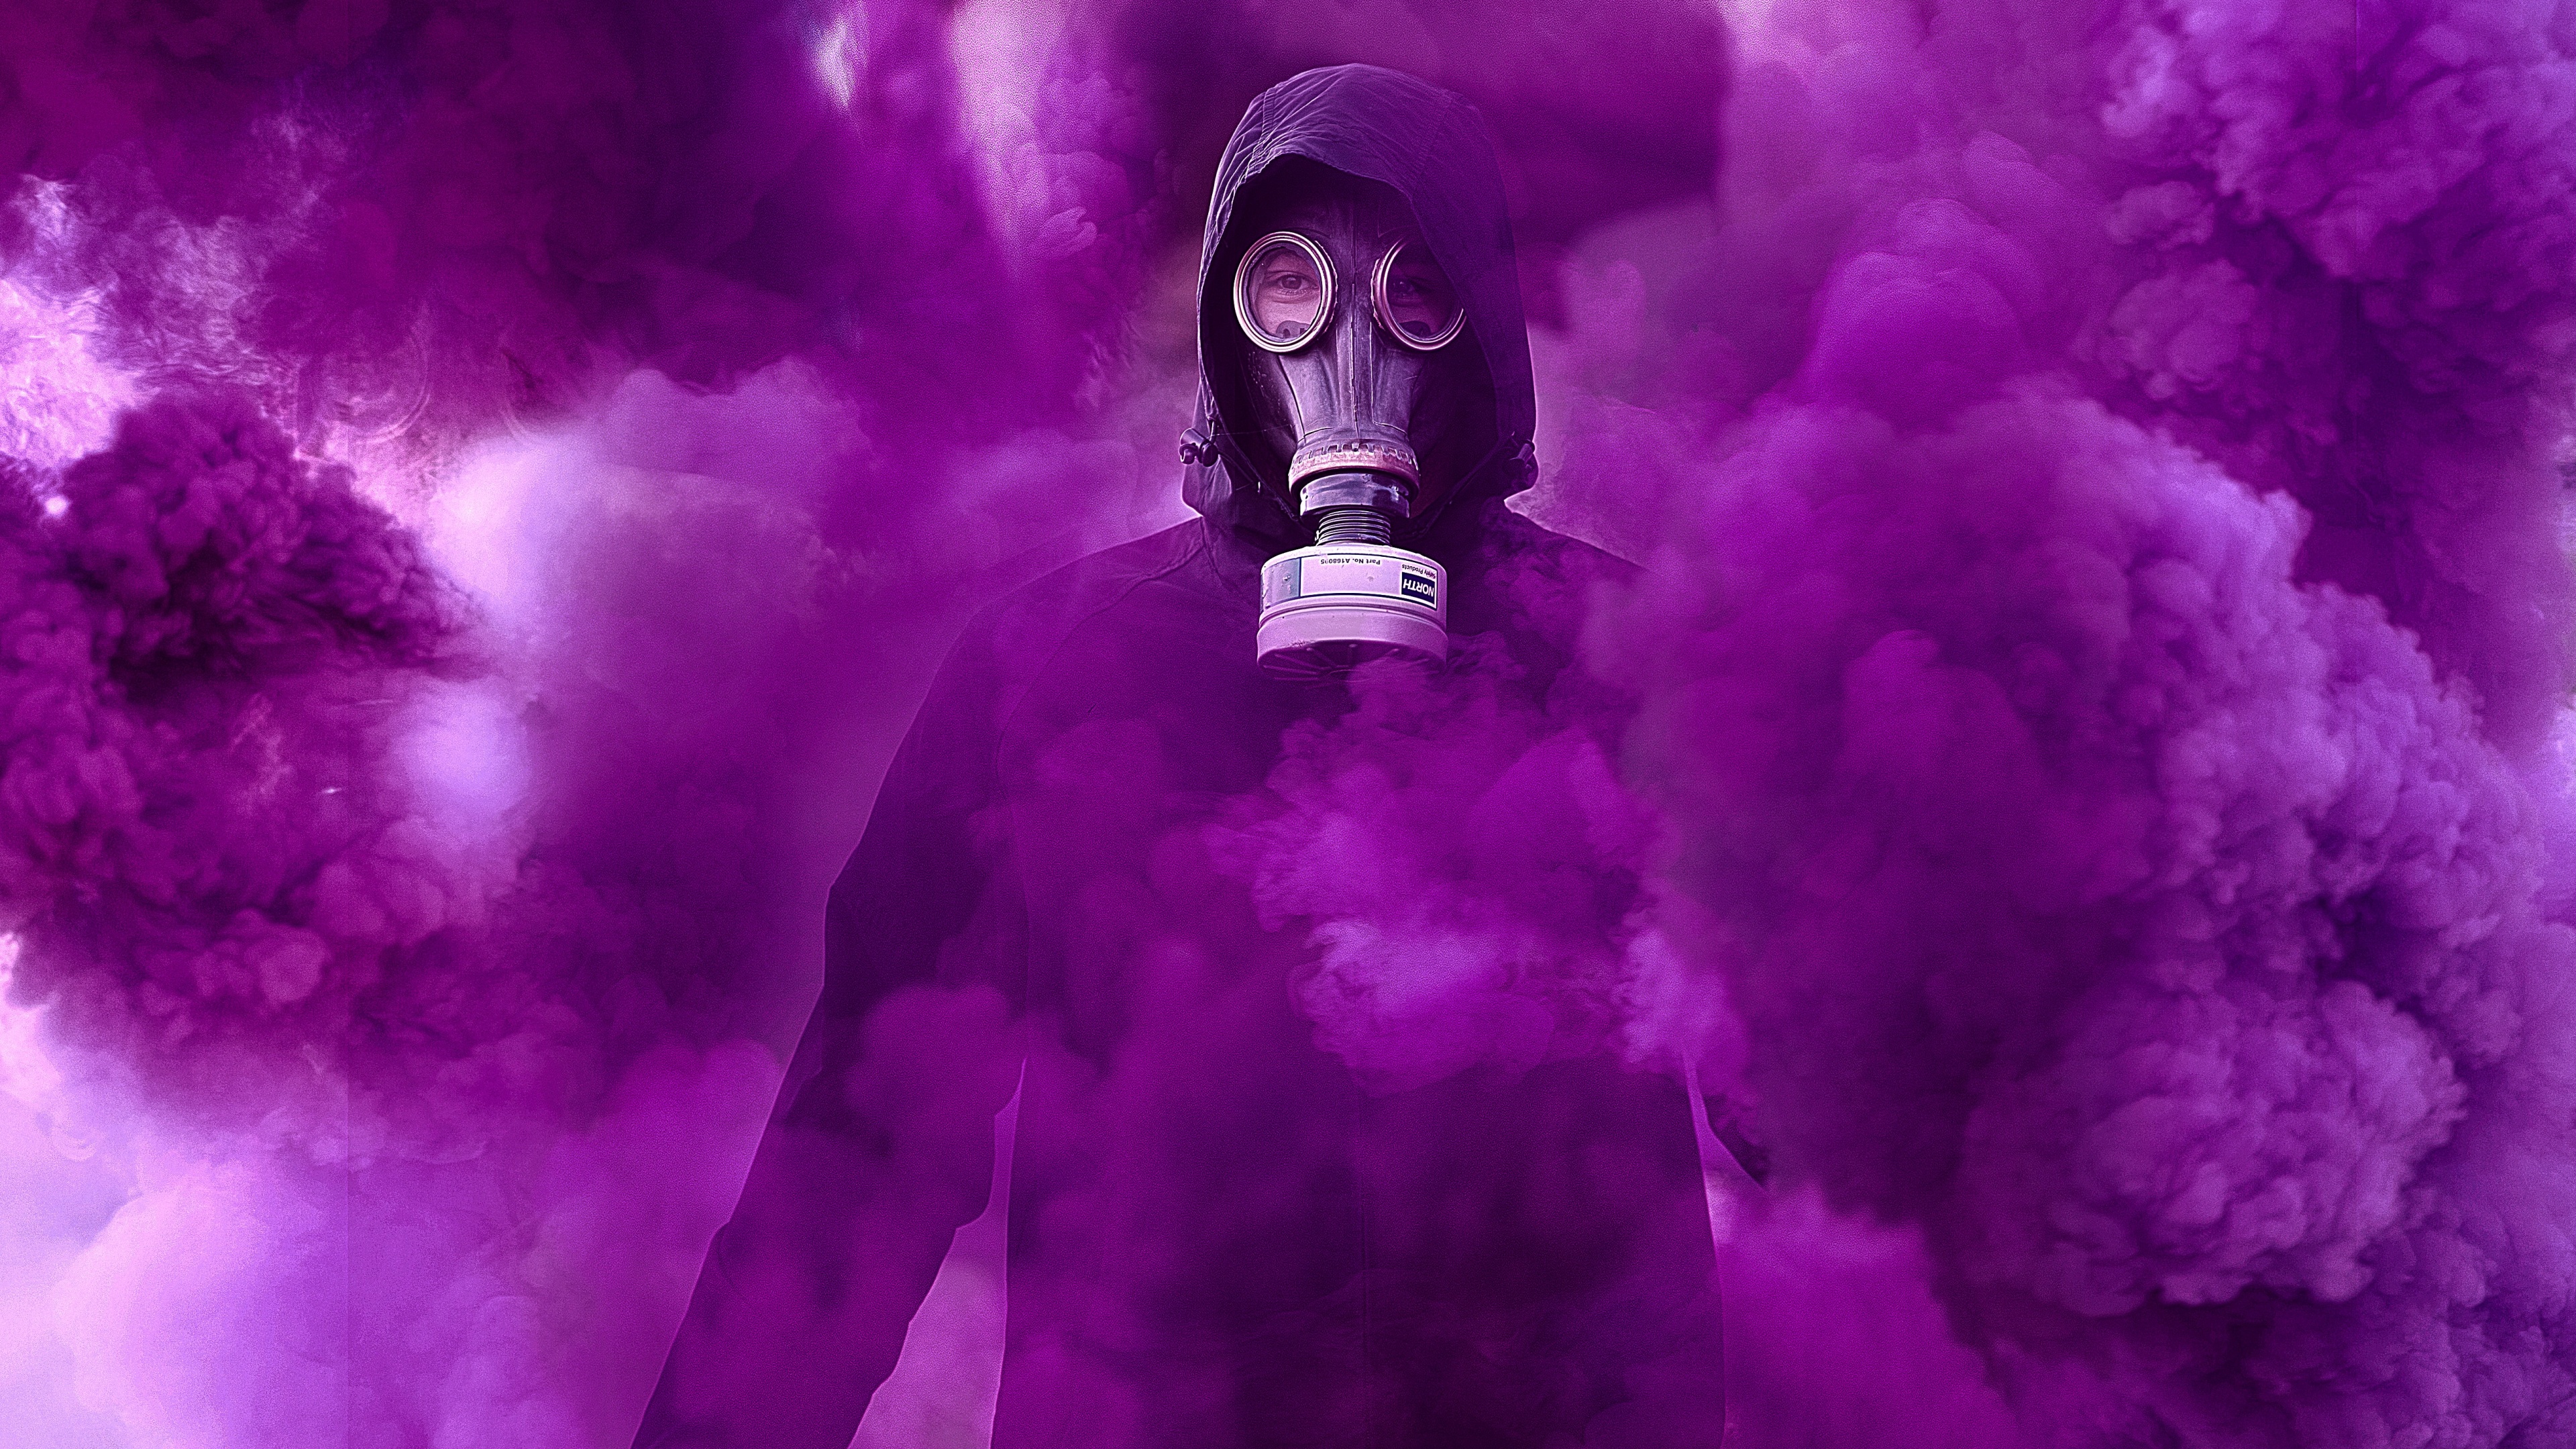 Toxic Gas Mask 5K Wallpapers | HD Wallpapers | ID #29398